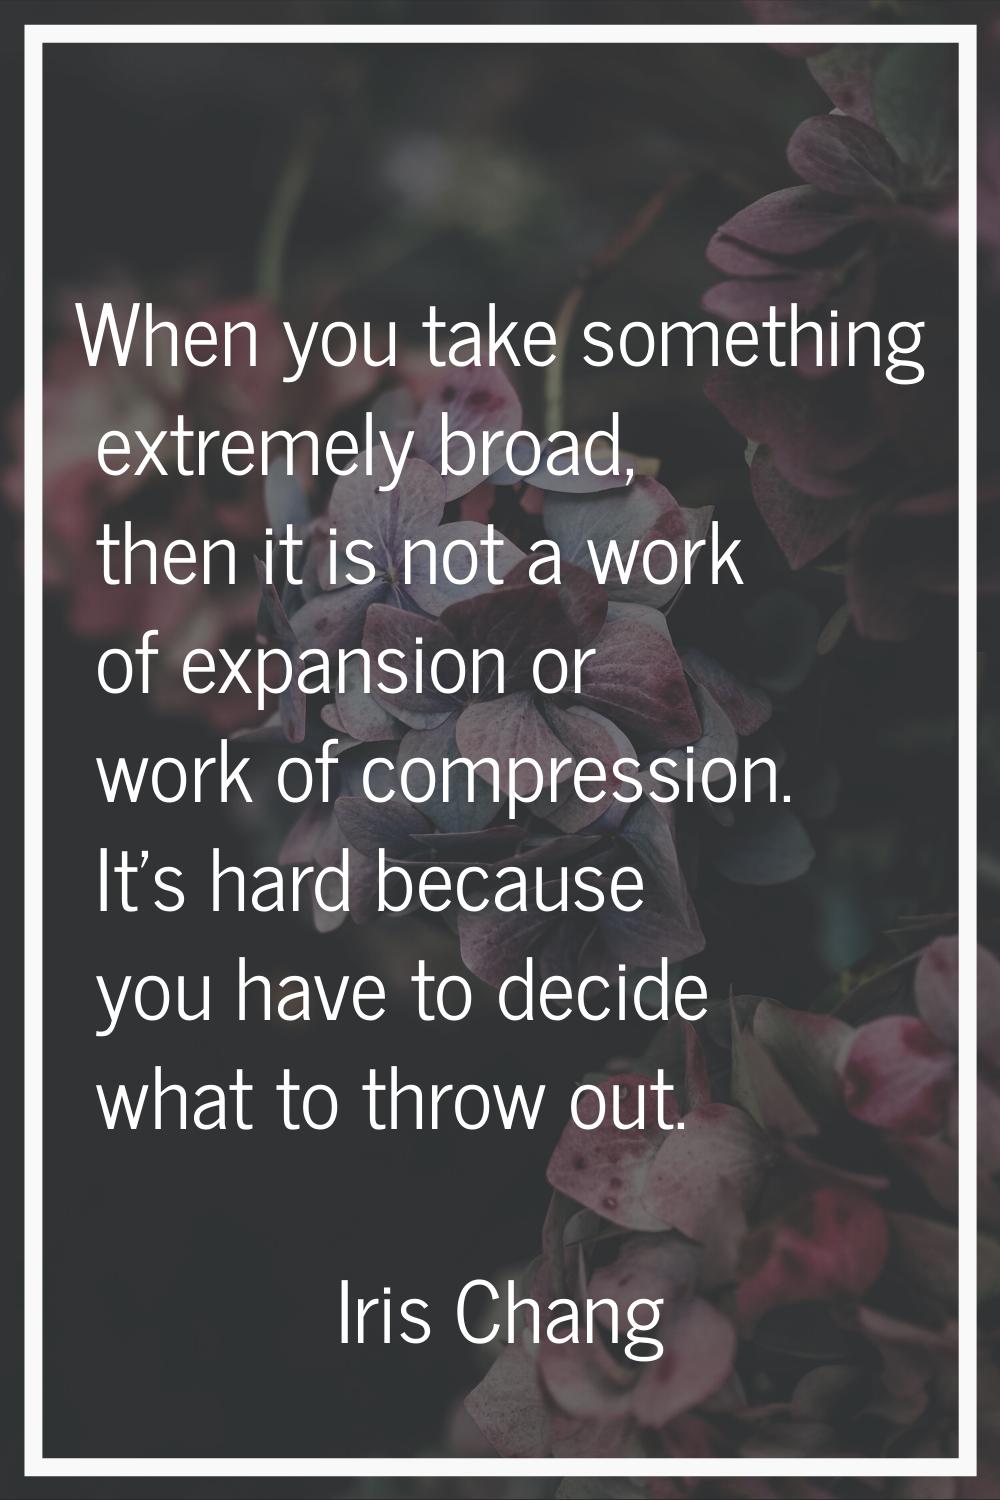 When you take something extremely broad, then it is not a work of expansion or work of compression.